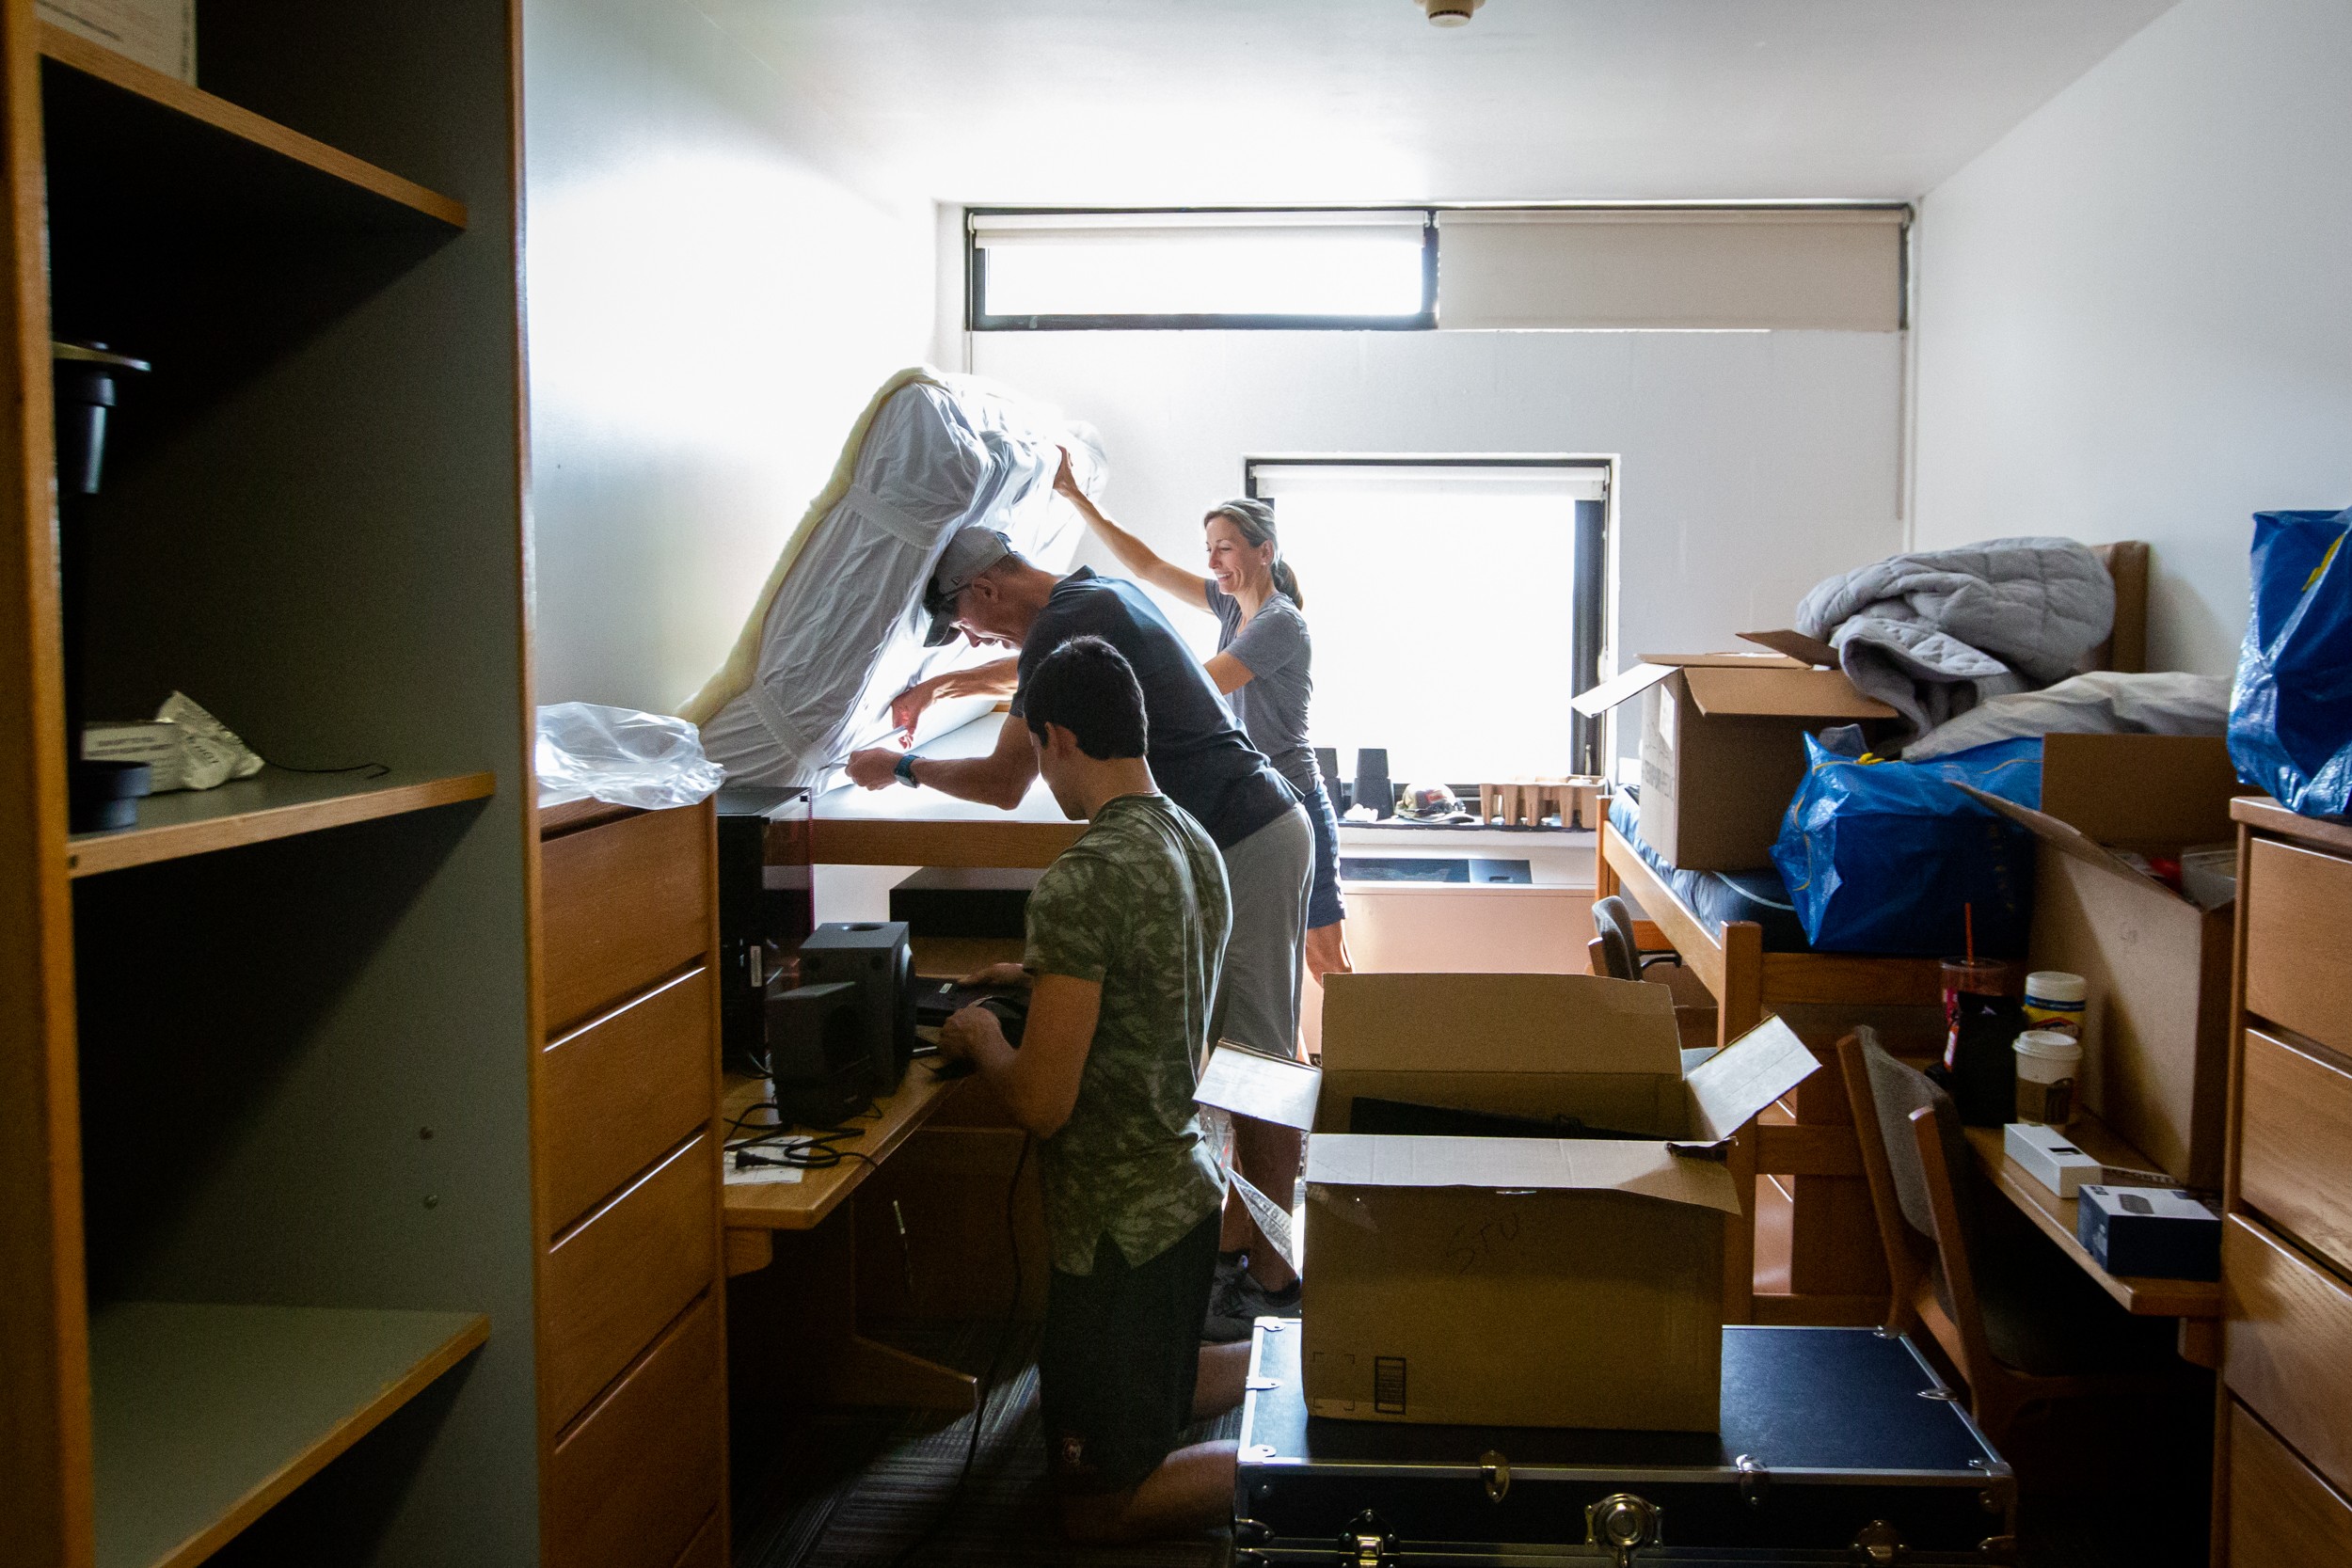 Student and parents unpacking and moving into an RIT dorm